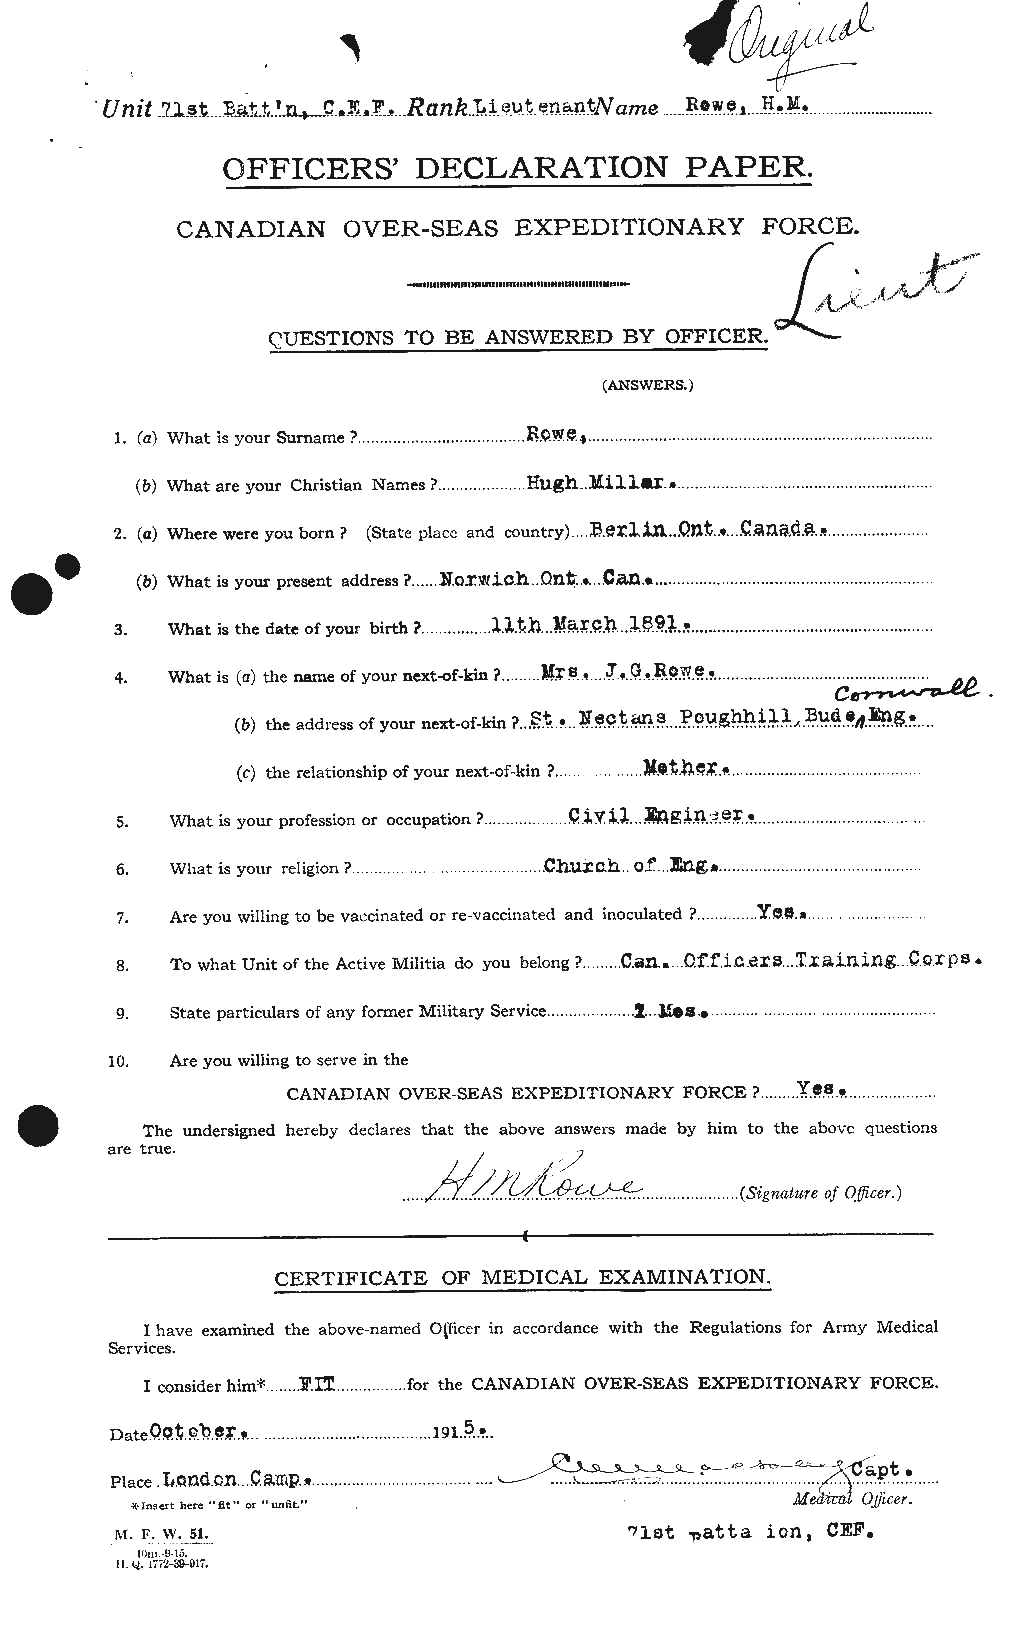 Personnel Records of the First World War - CEF 615903a